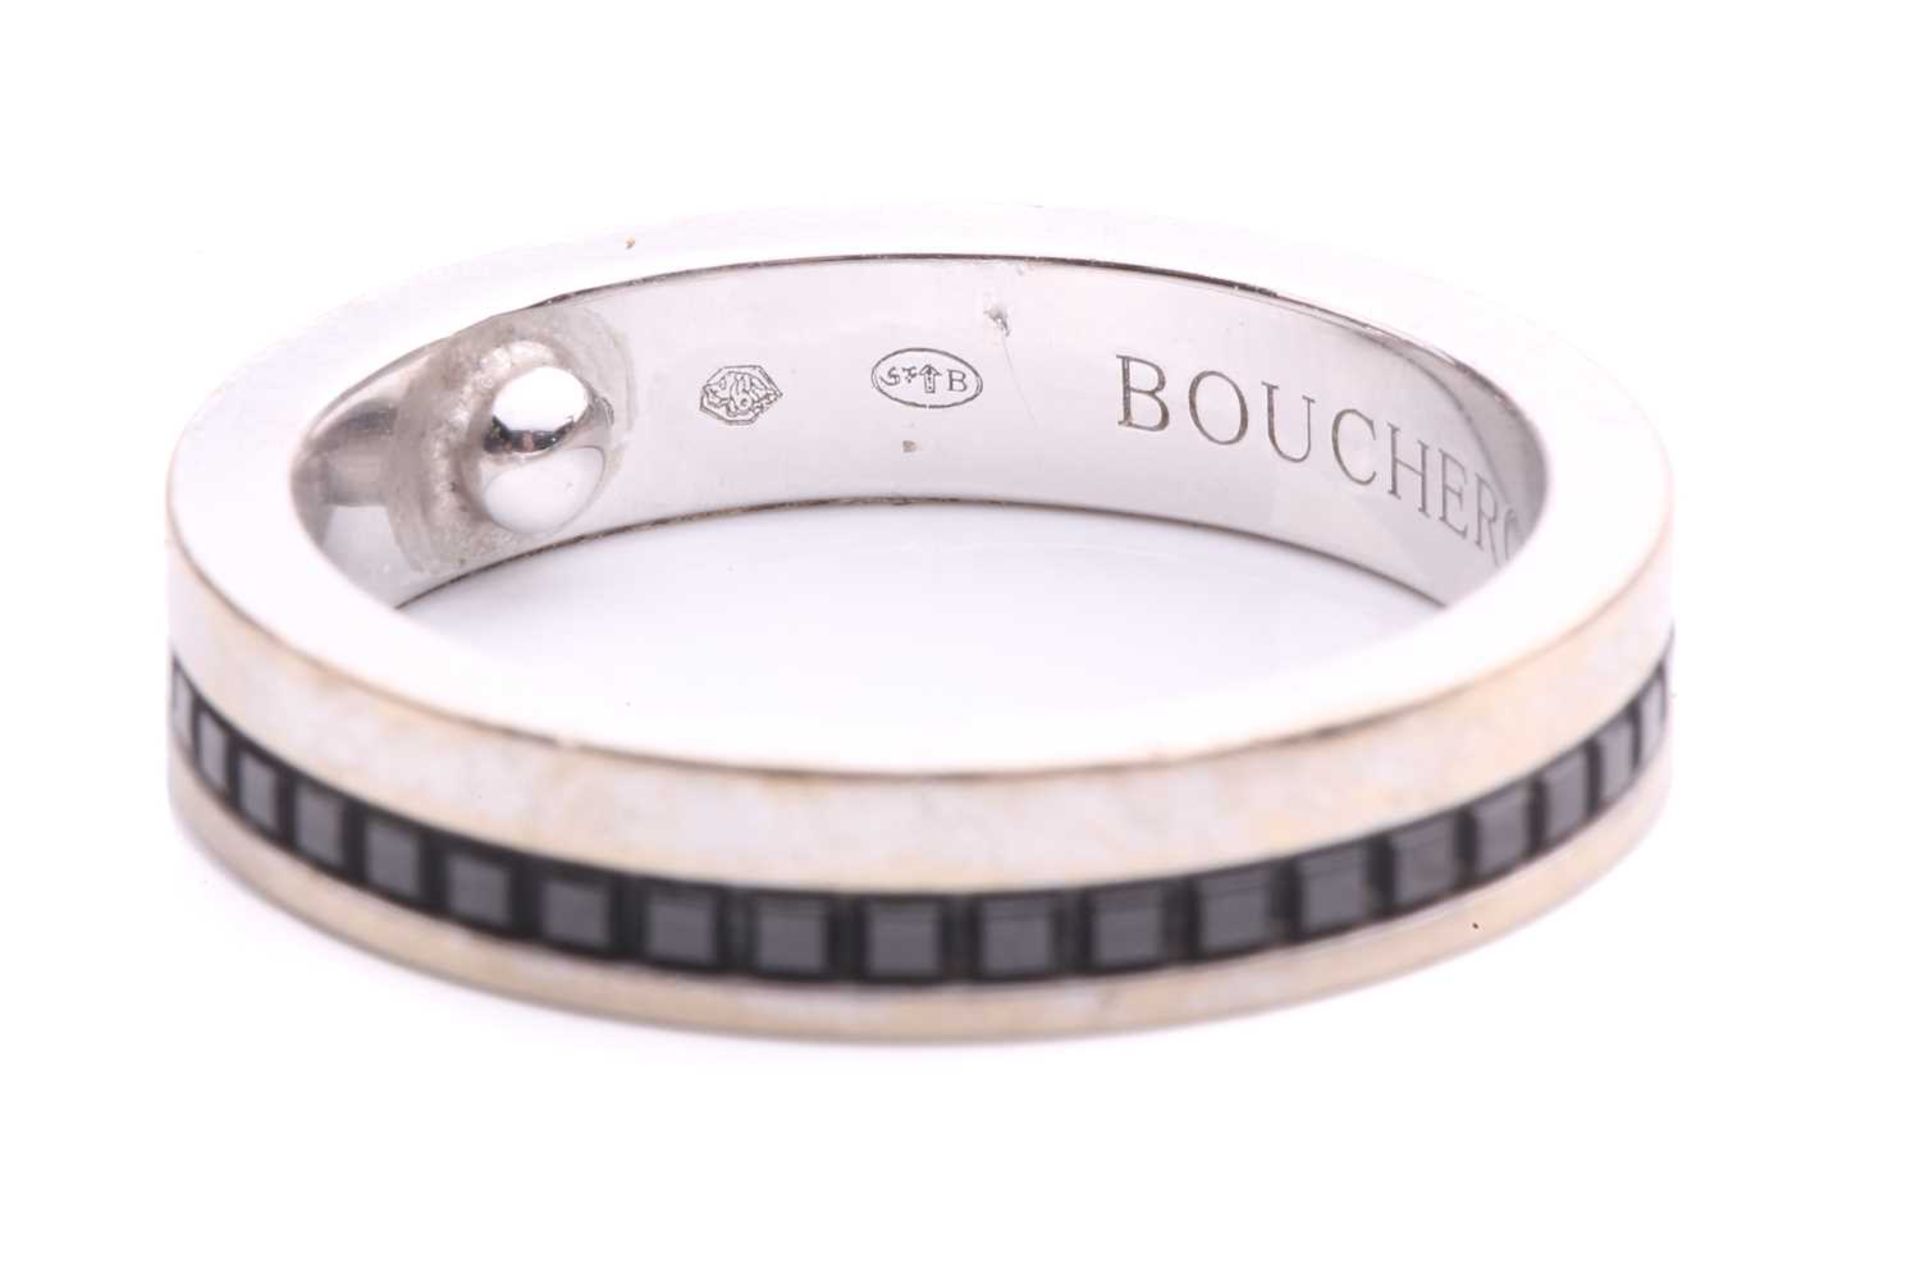 Boucheron - a 'Quatre' black edition wedding band, the polished flat band accented with studded - Image 4 of 6